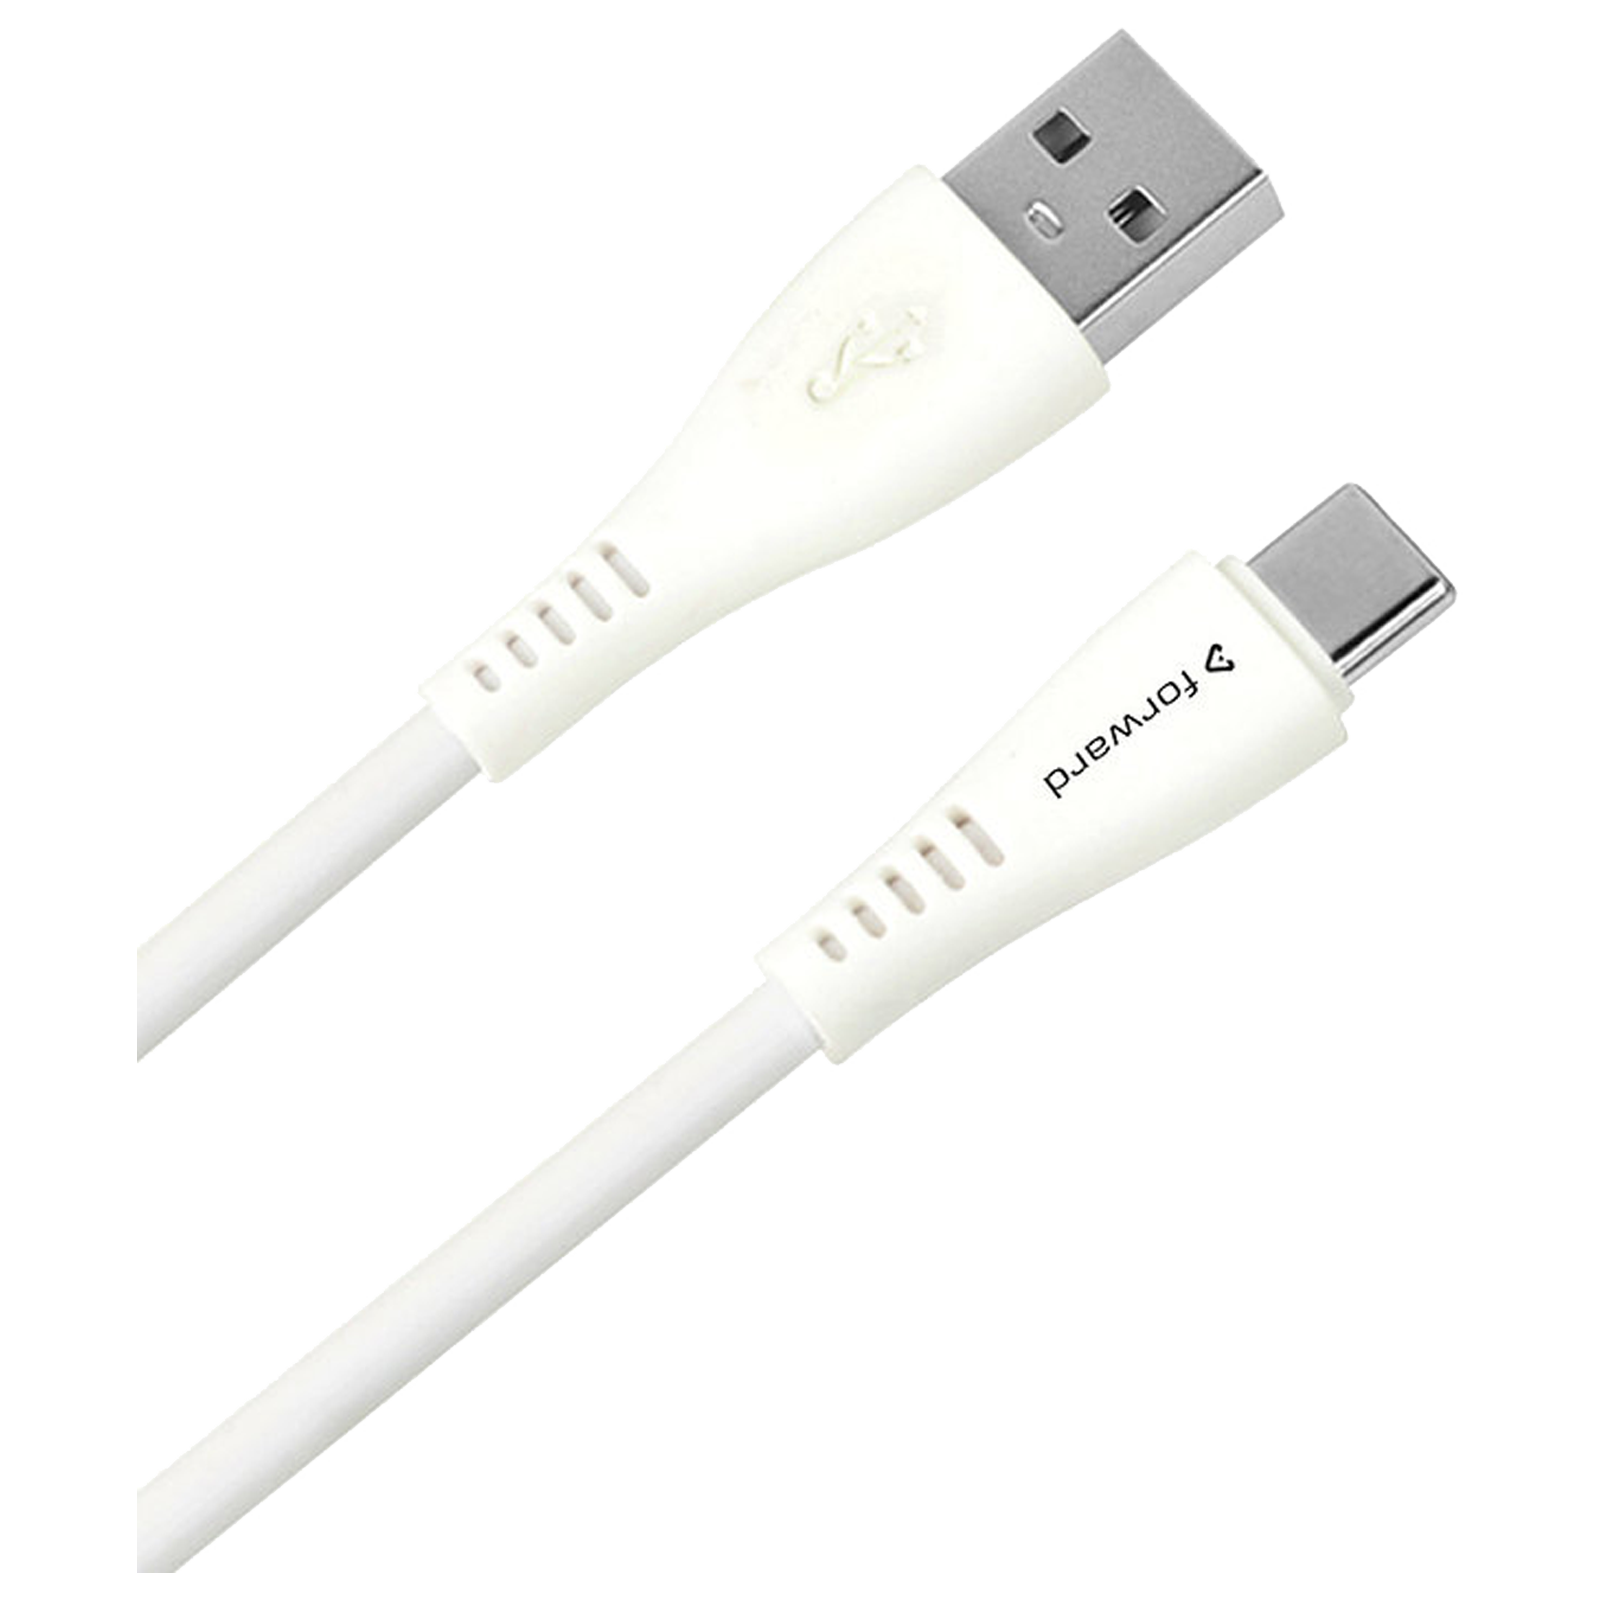 Forward PVC 1 Meter USB 2.0 (Type-A) to USB 3.0 (Type-C) Power/Charging, Data Transfer USB Cable (Fast Charging, FCT09, White)_3